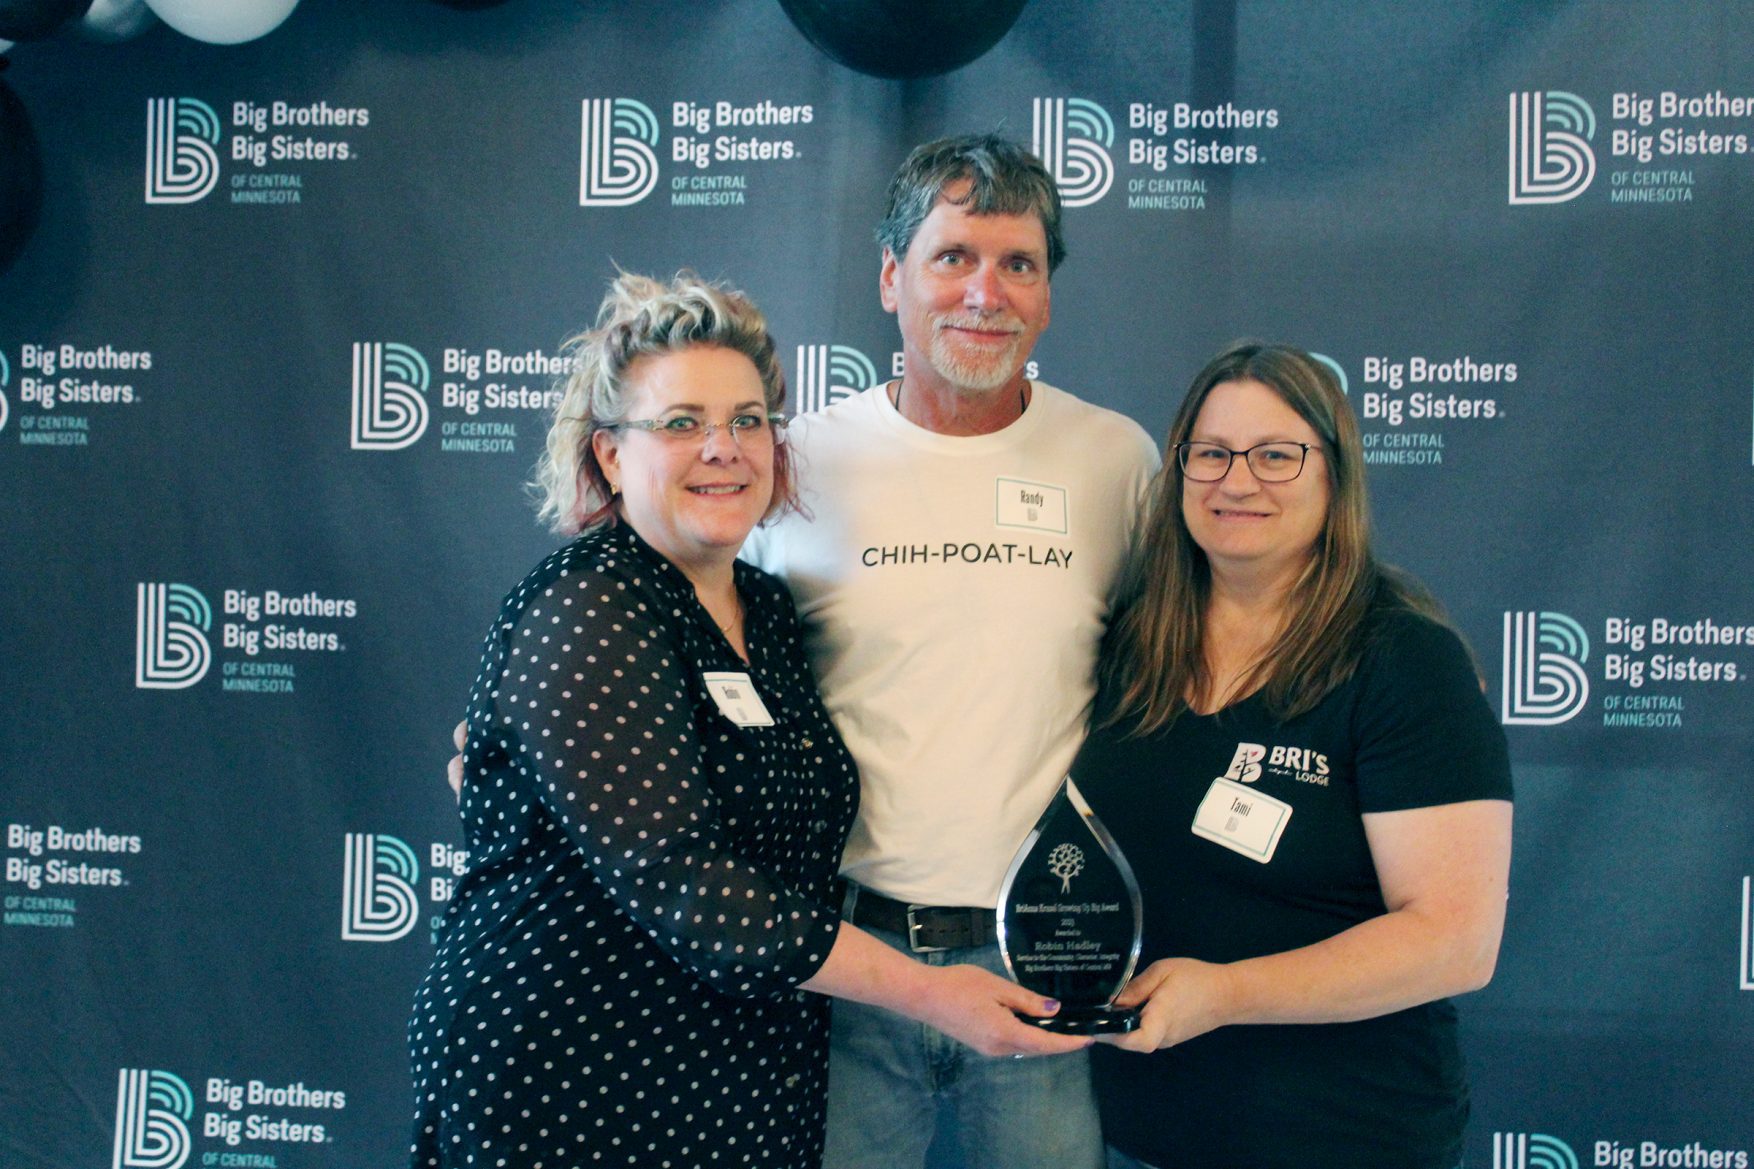 Three adults - Robin Hadley and Randy and Tami Kruzel - pose with an award in front of a Big Brothers Big Sisters backdrop